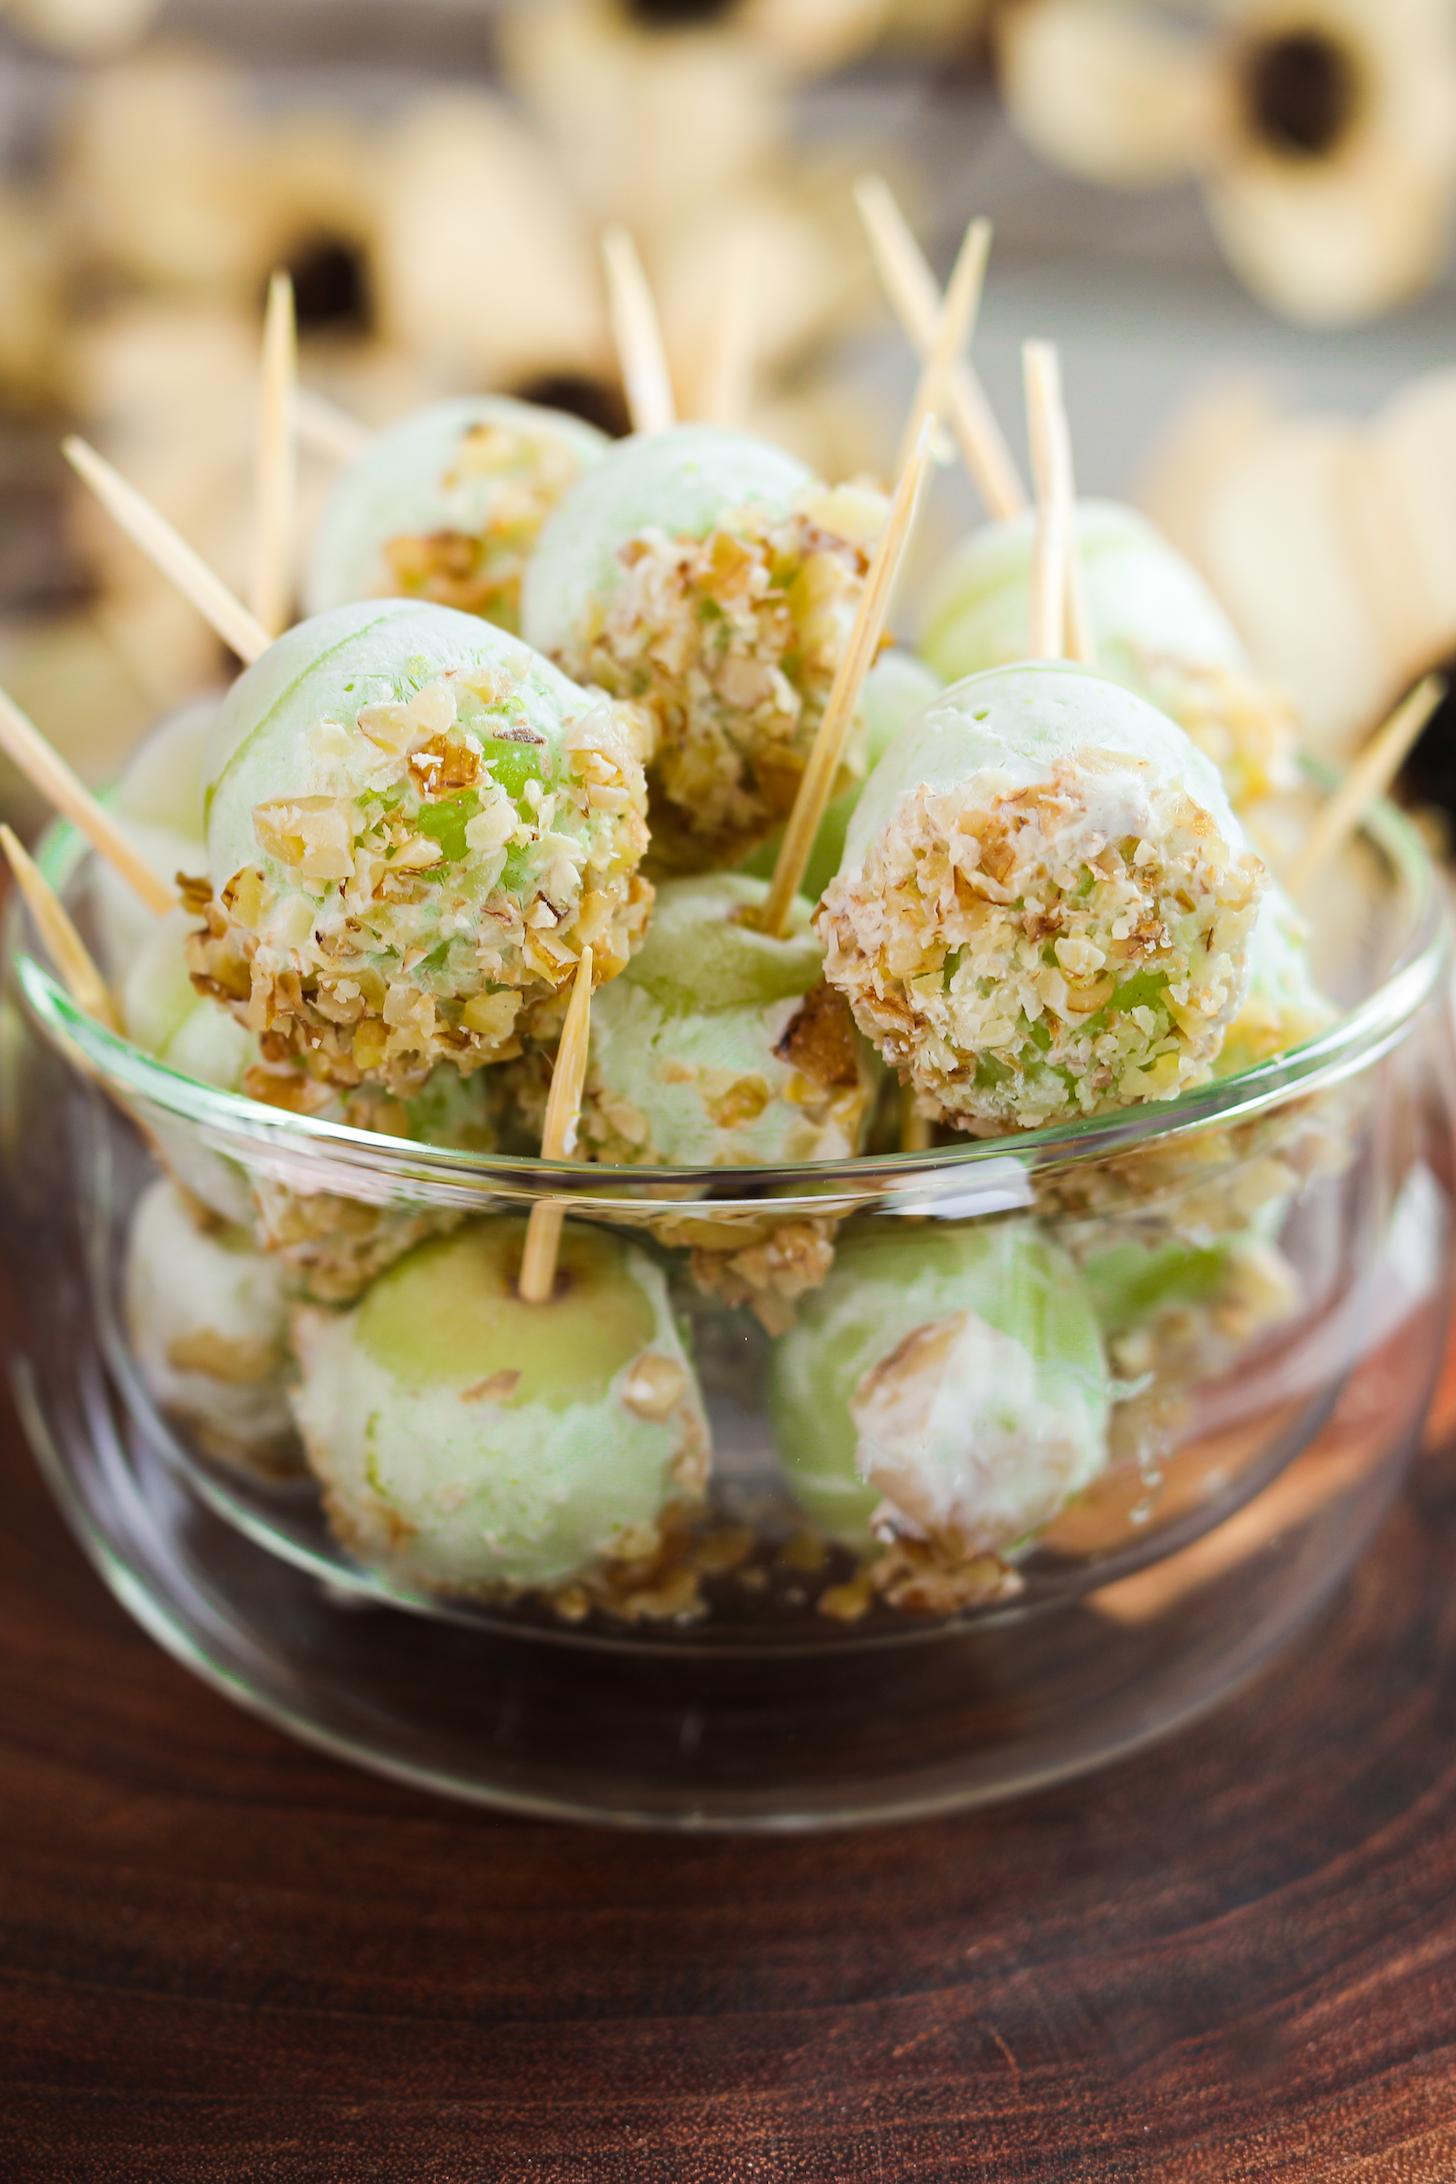 A perspective close up image displays a bowl filled with grapes on wooden picks, coated in yogurt, and garnished with crushed nuts.